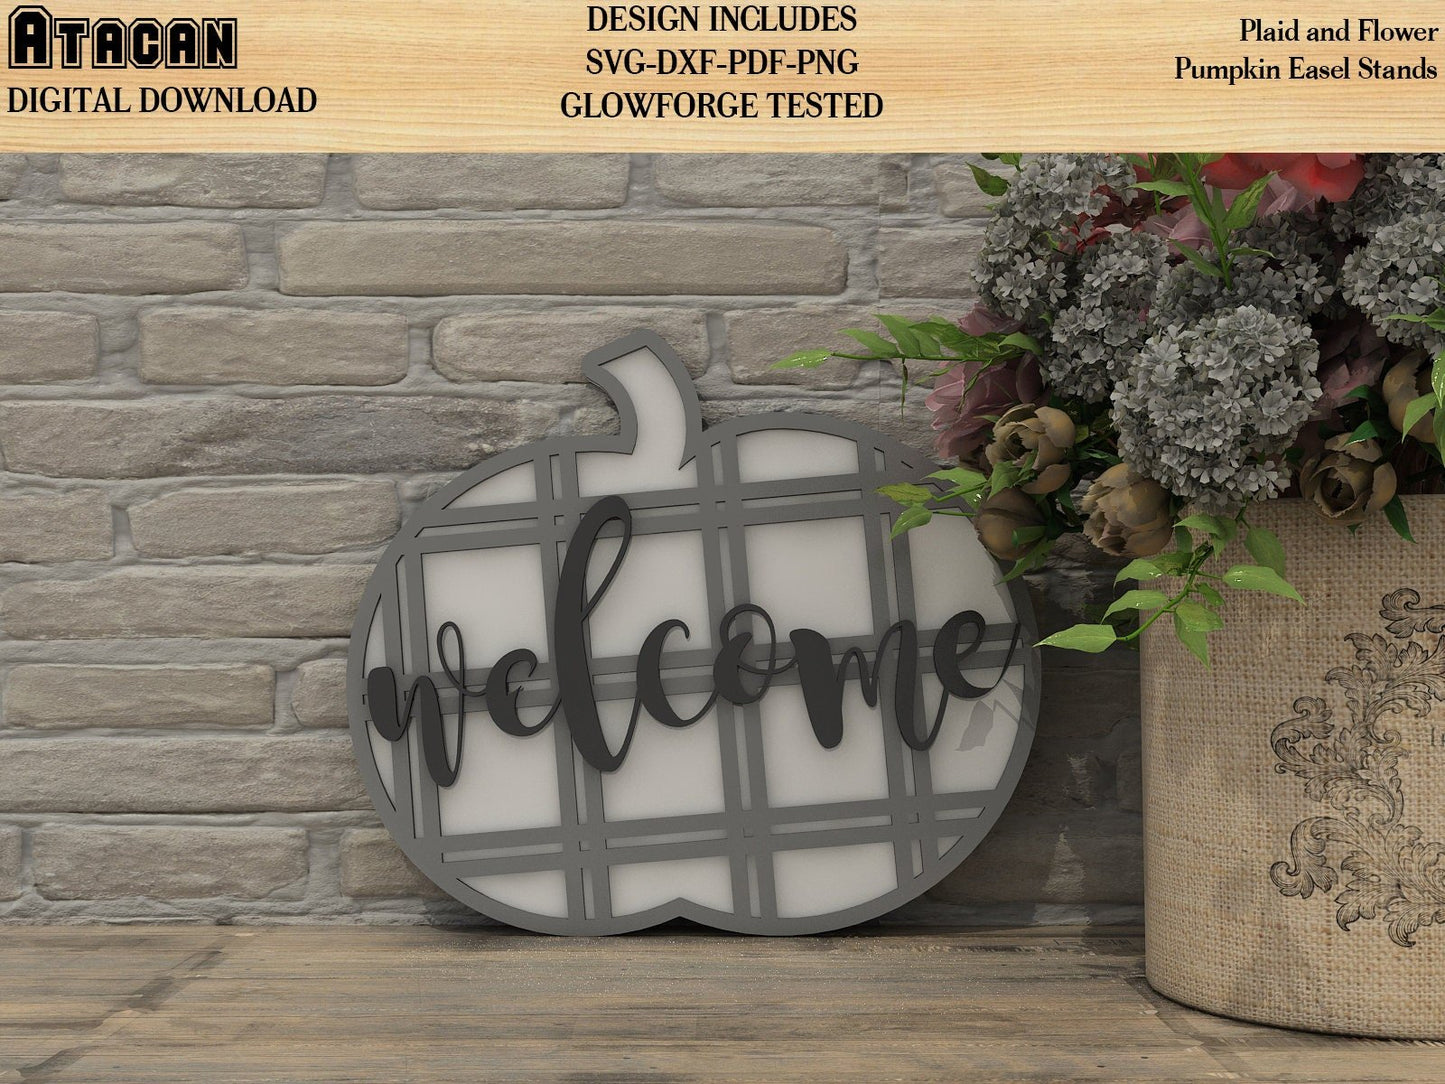 Plaid and Flowery Pumpkin for Easel Stands SVG files for Glowforge 174